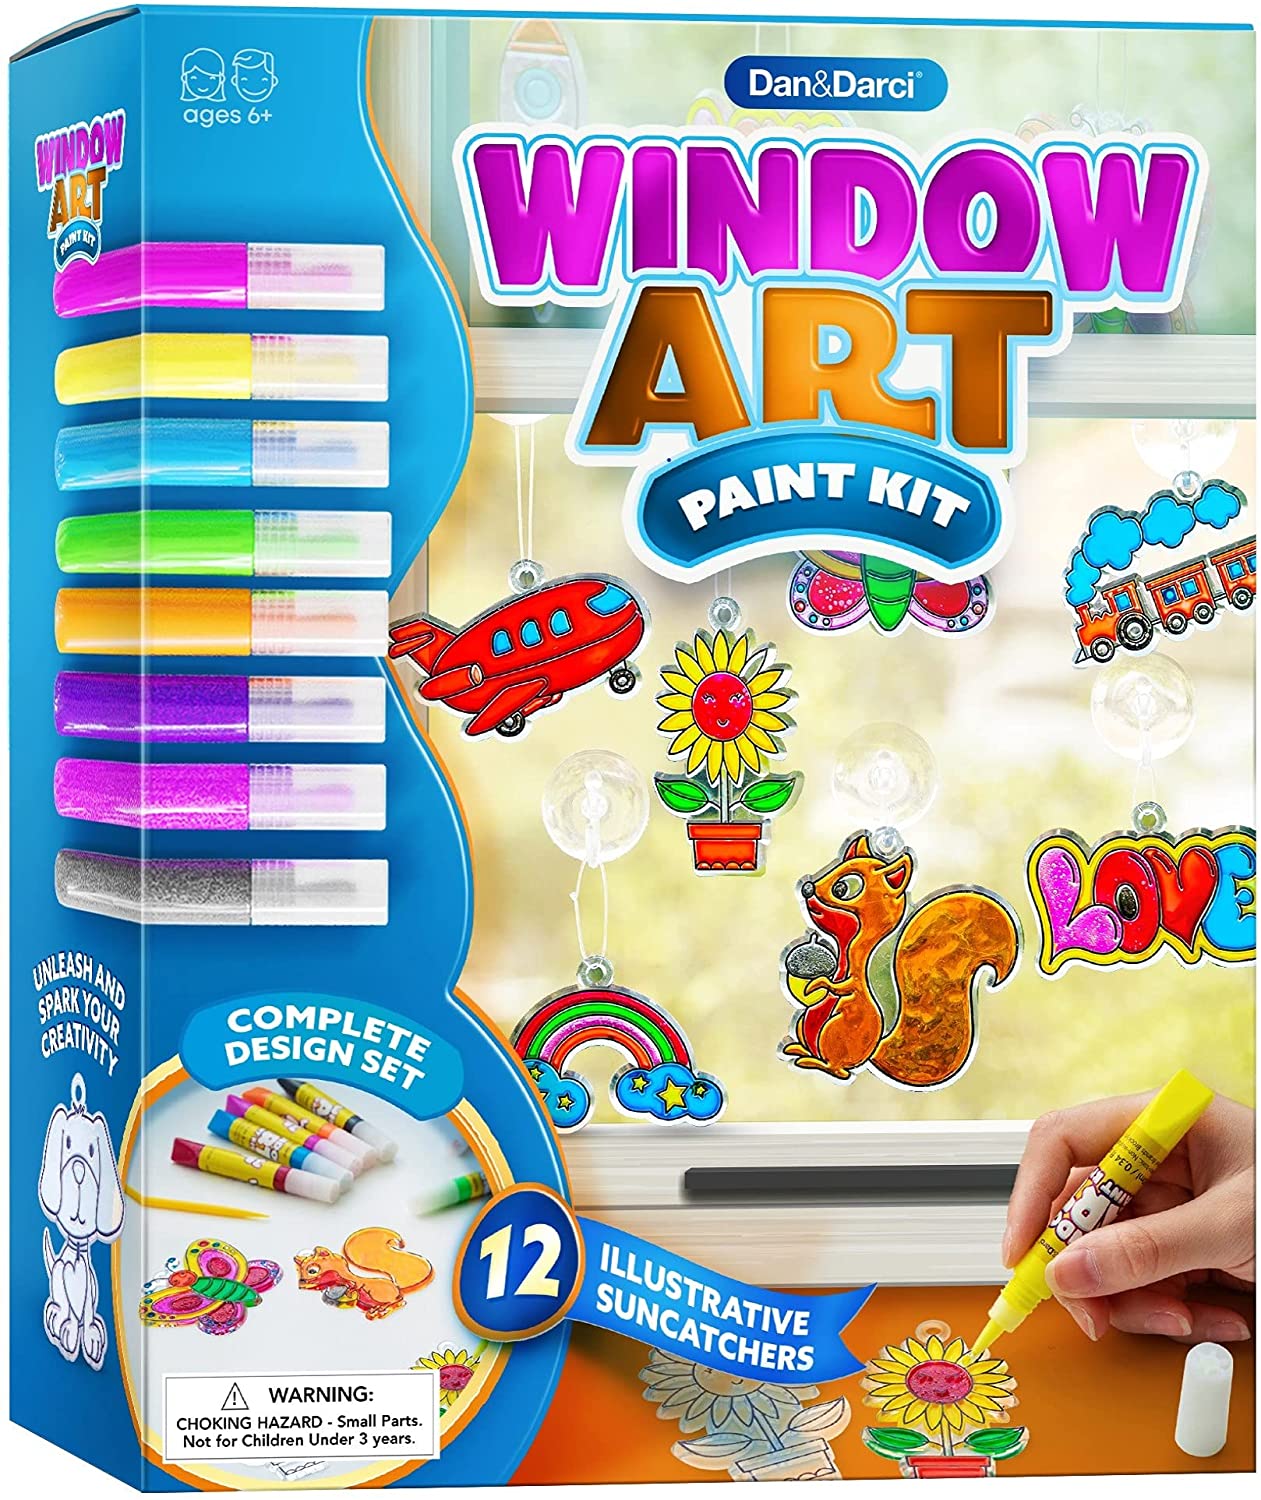 Dan&Darci Window Art for Kids - Sun Catchers Painting Kit - Suncatcher  Craft Set Gift for Kids - Arts and Crafts Ages 6-12 yr Old - Paint  Activities Kits Projects - Girl Boys DIY Age 5 6 7 8 9 10 